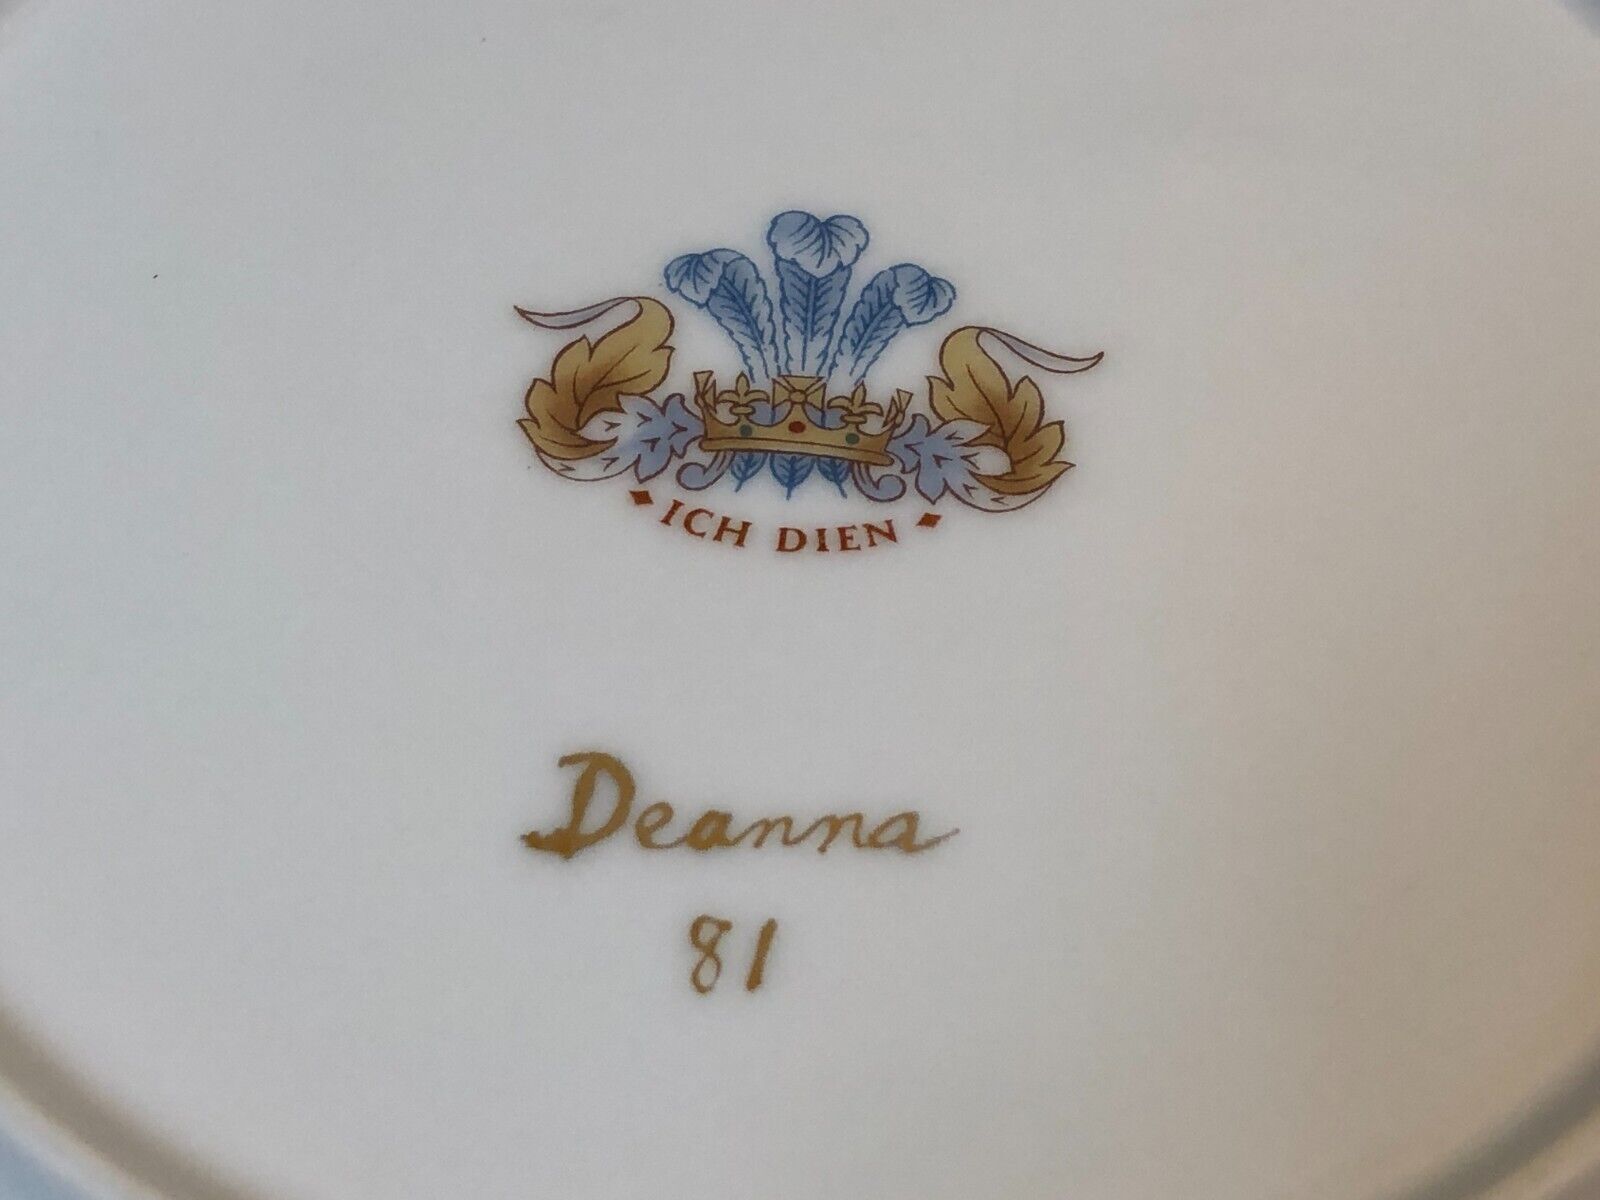 Princess Diana and Prince Charles Commemorative Plate 1981 FREE SPIPPING